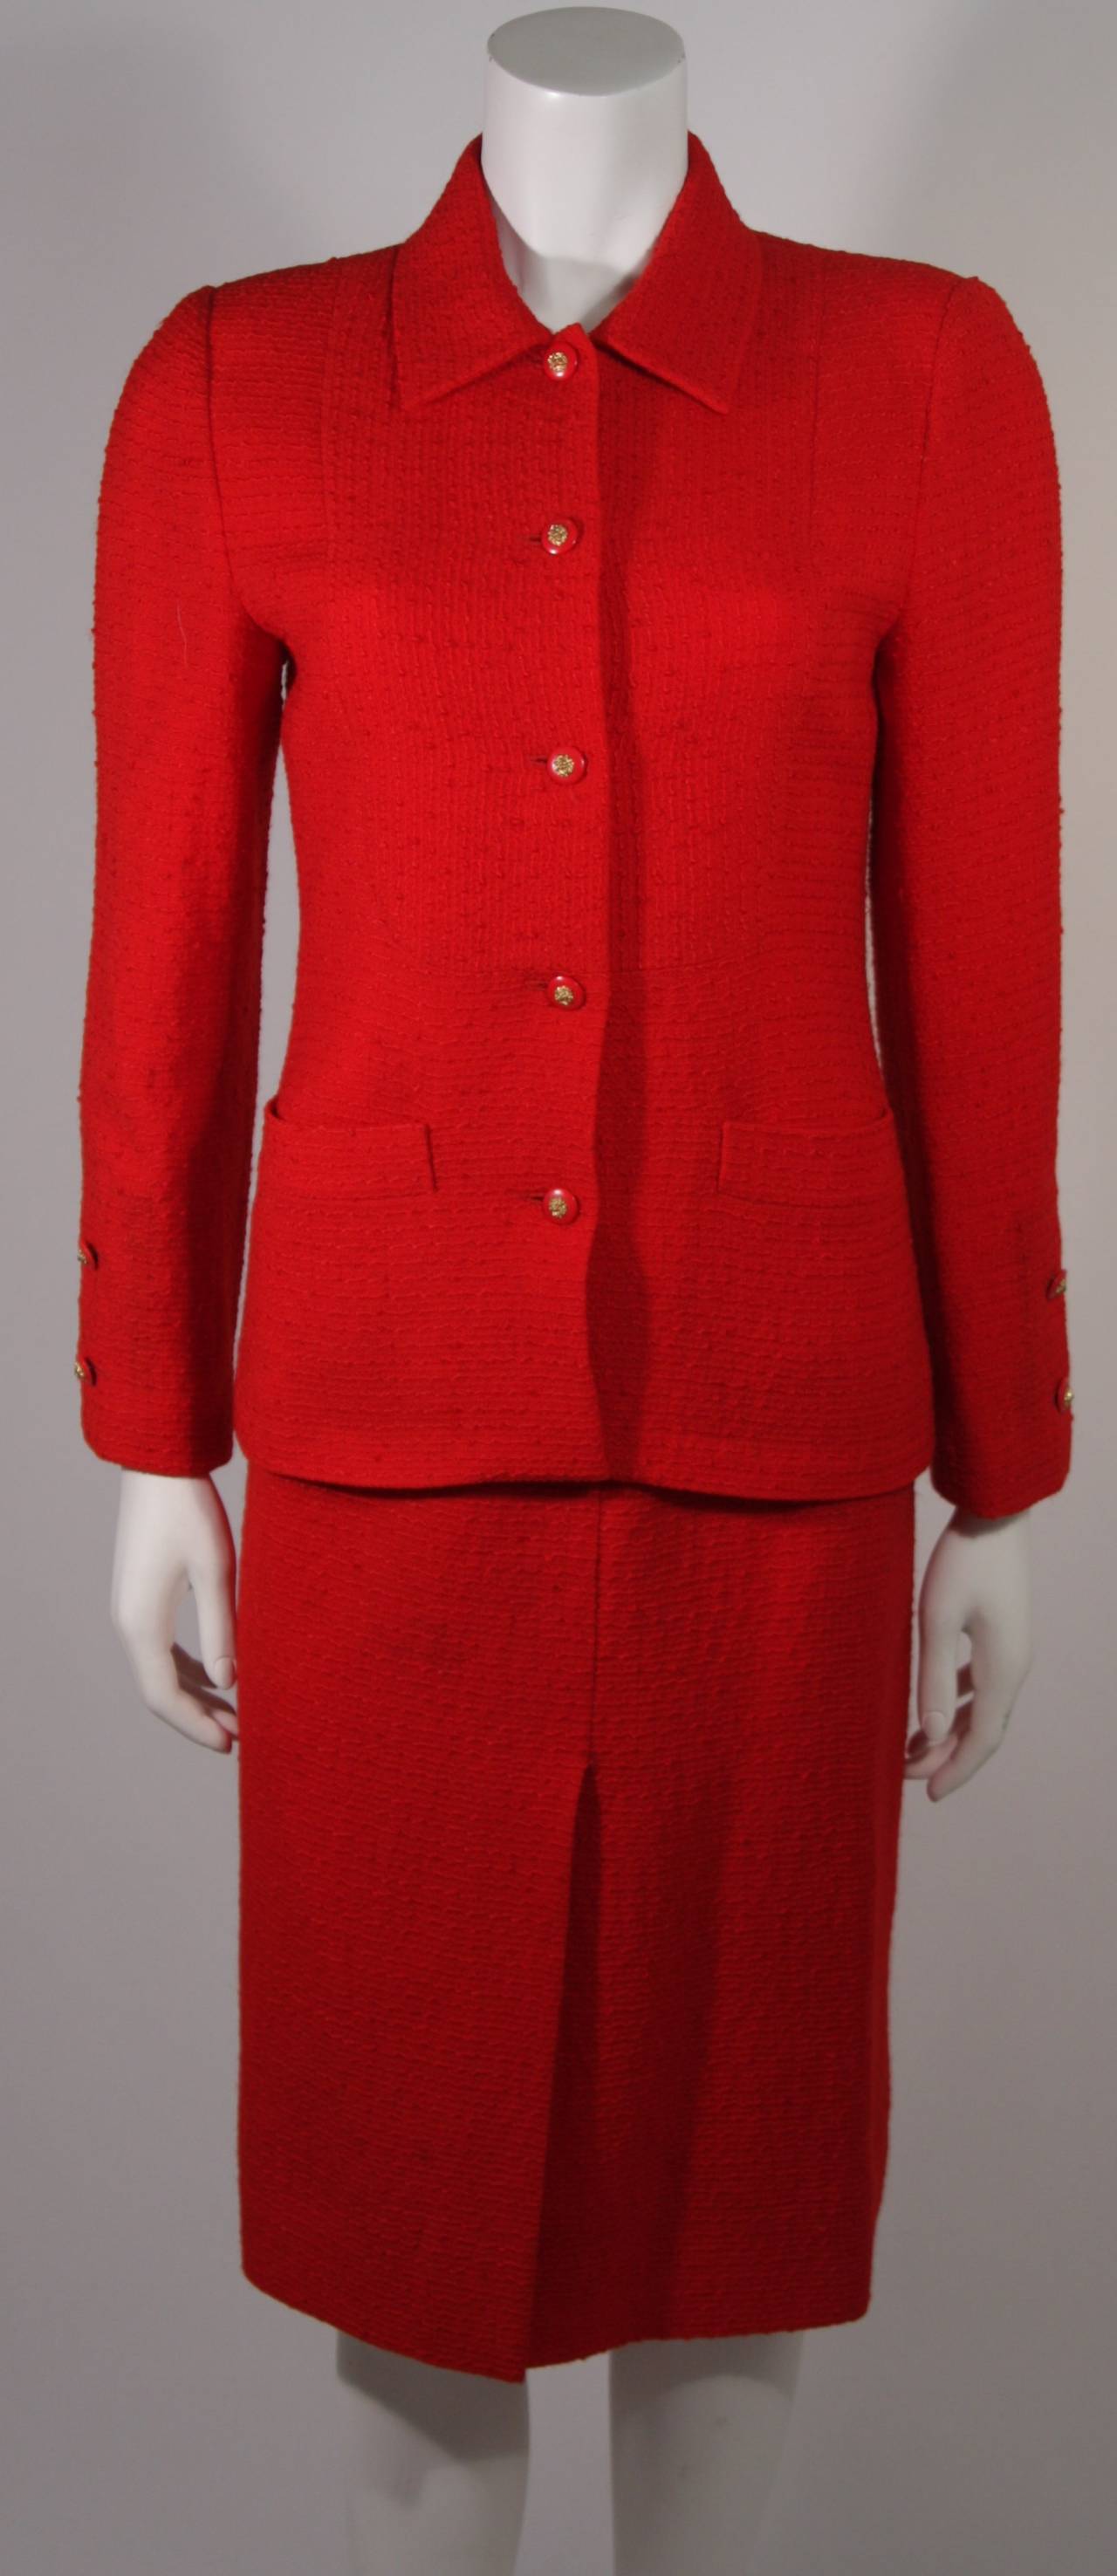 This is a beautiful Chanel skirt suit. The suit is composed of a wonderful red boucle fashioned out of a wool and silk blend. The Jacket features center front button closures, and the skirt has a side zipper with top button fastening. Wool/ Silk